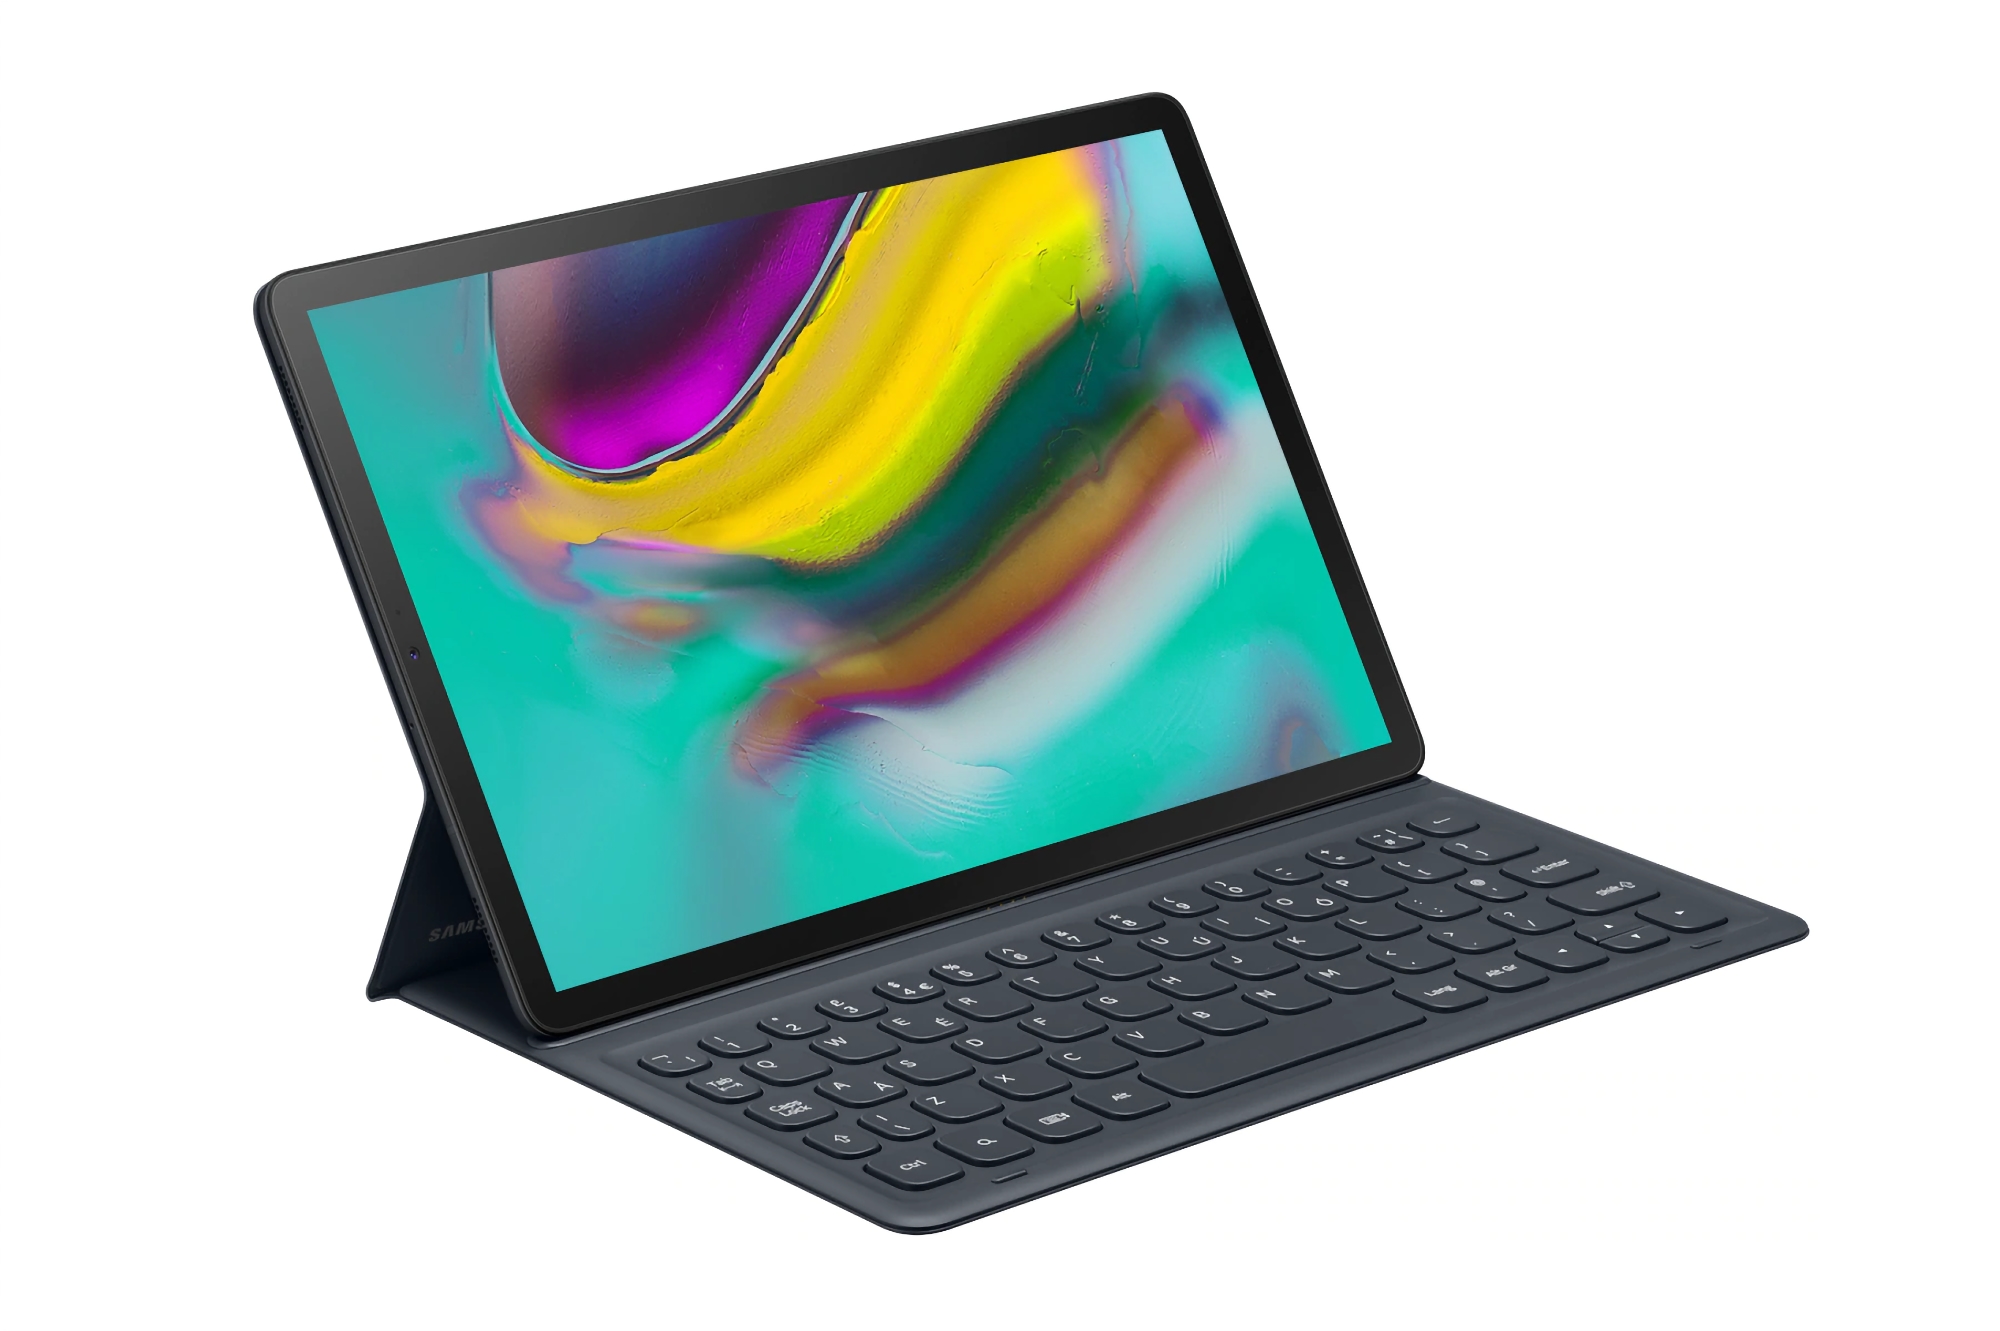 Samsung Galaxy Tab S5e with an update got Galaxy Z Fold 3 smartphone features